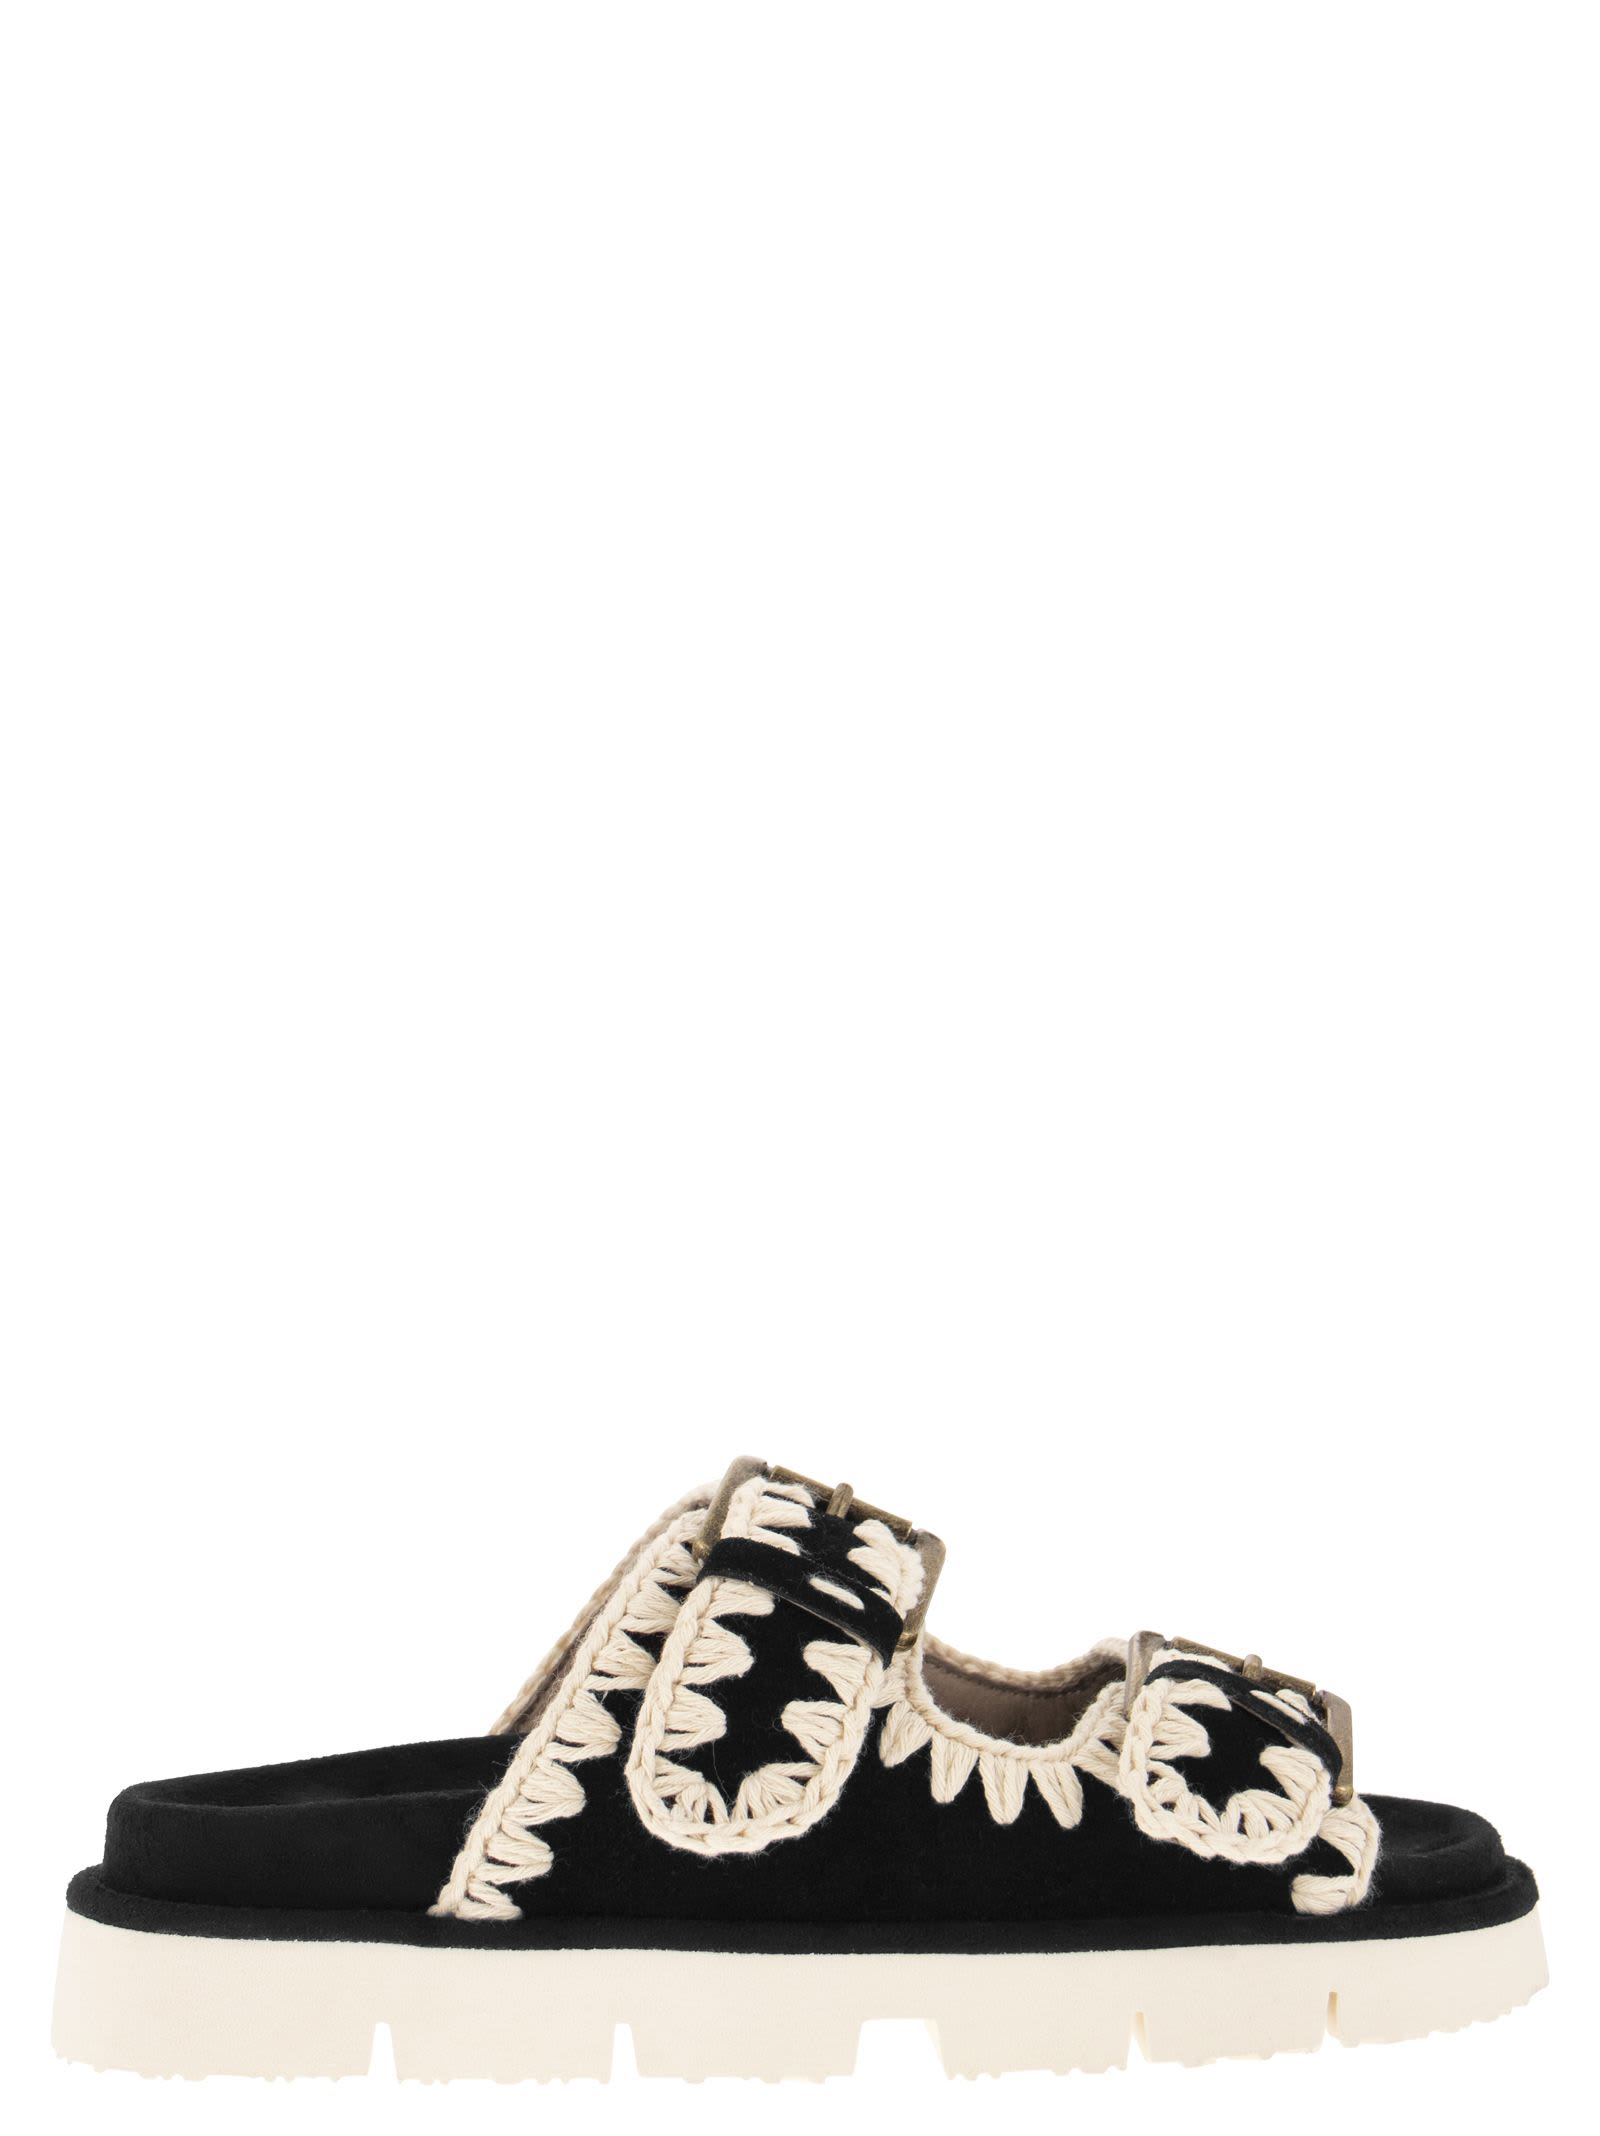 Mou Bio With Buckles Black Sandal With Embroidery New Bio With Buckles | ModeSens